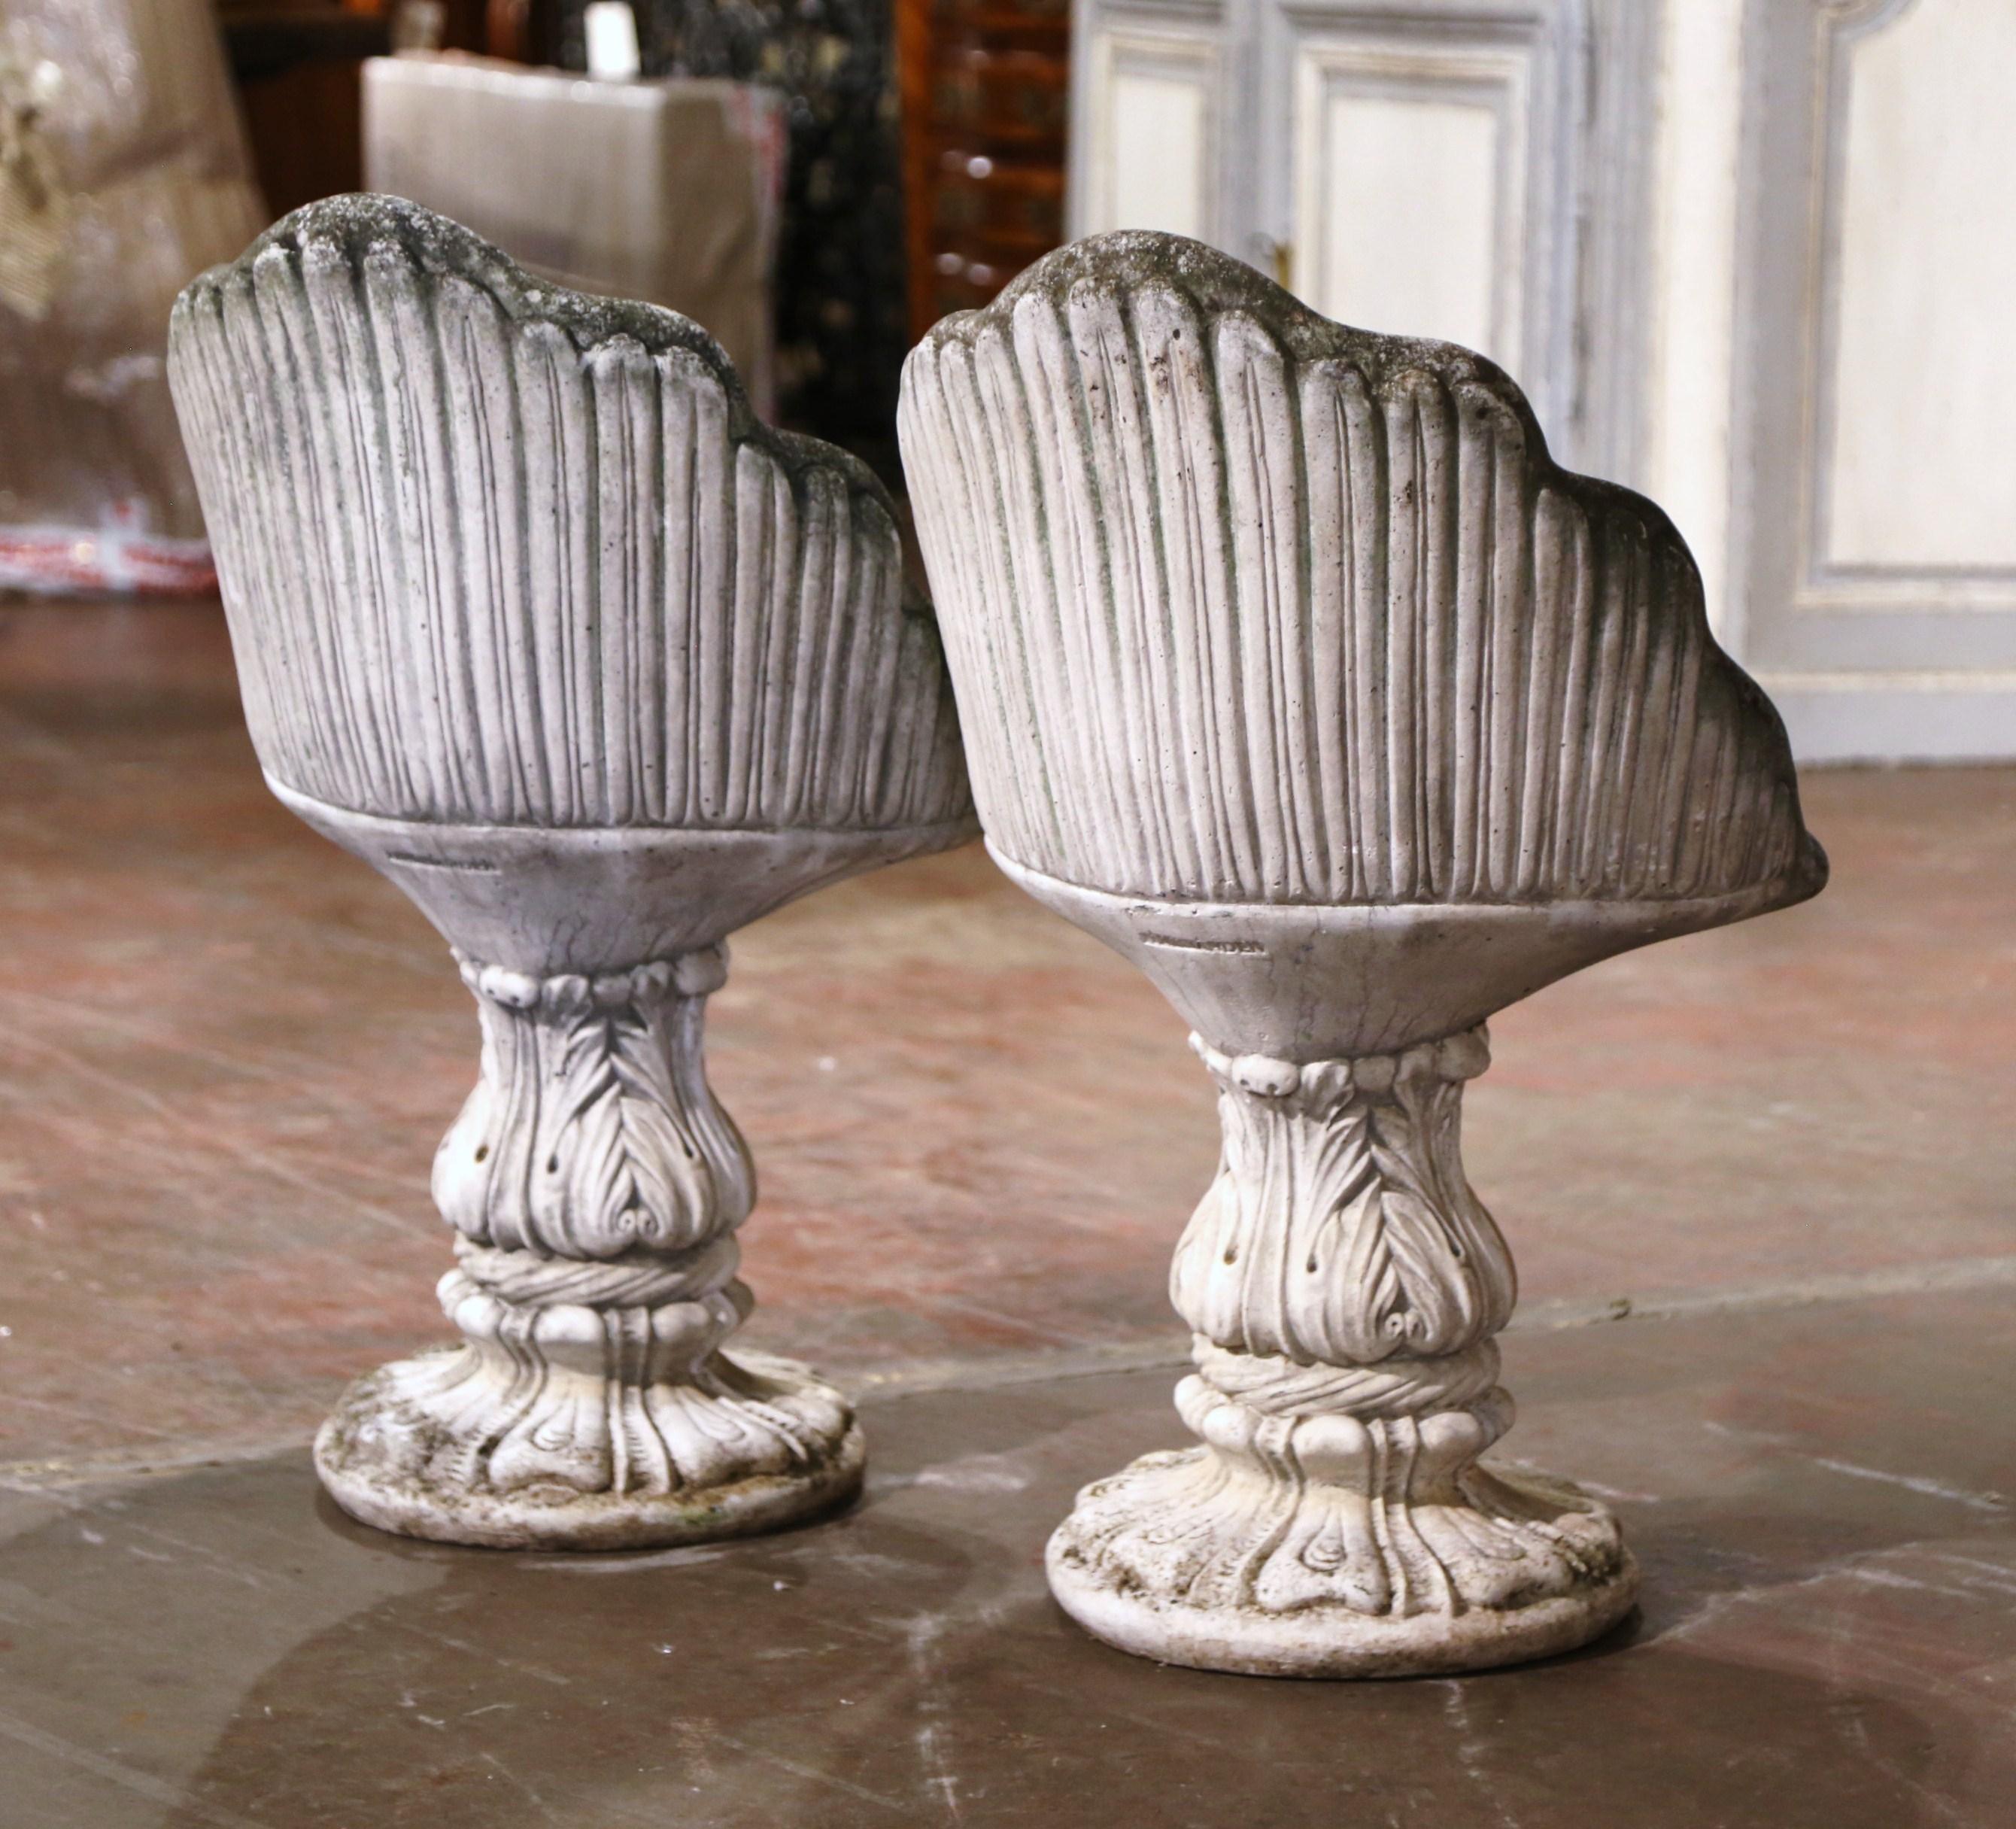 Pair of Mid Century Carved Stone Garden Chairs with Seashell Motifs For Sale 2